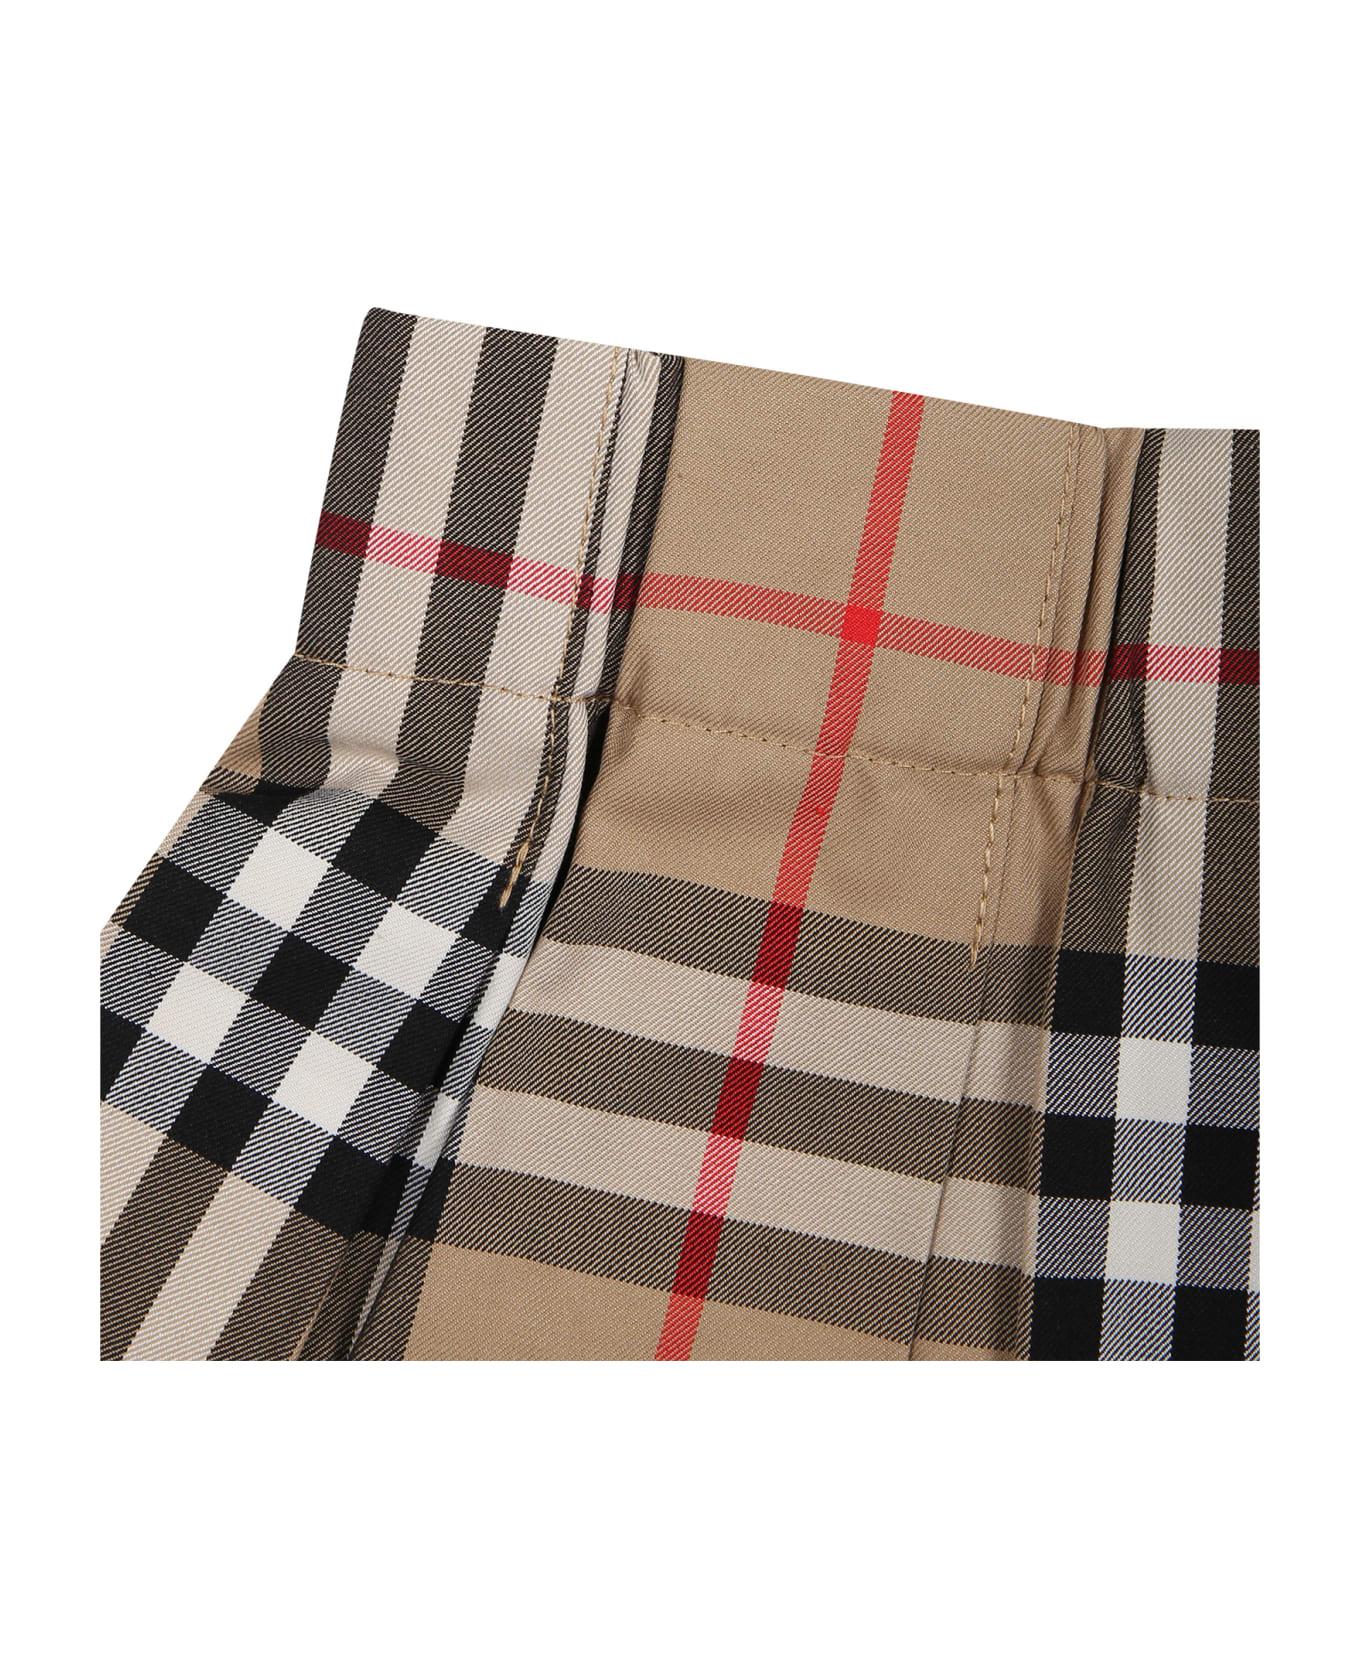 Burberry Beige Skirt For Baby Girl With Iconic All-over Vintage Check - Beige